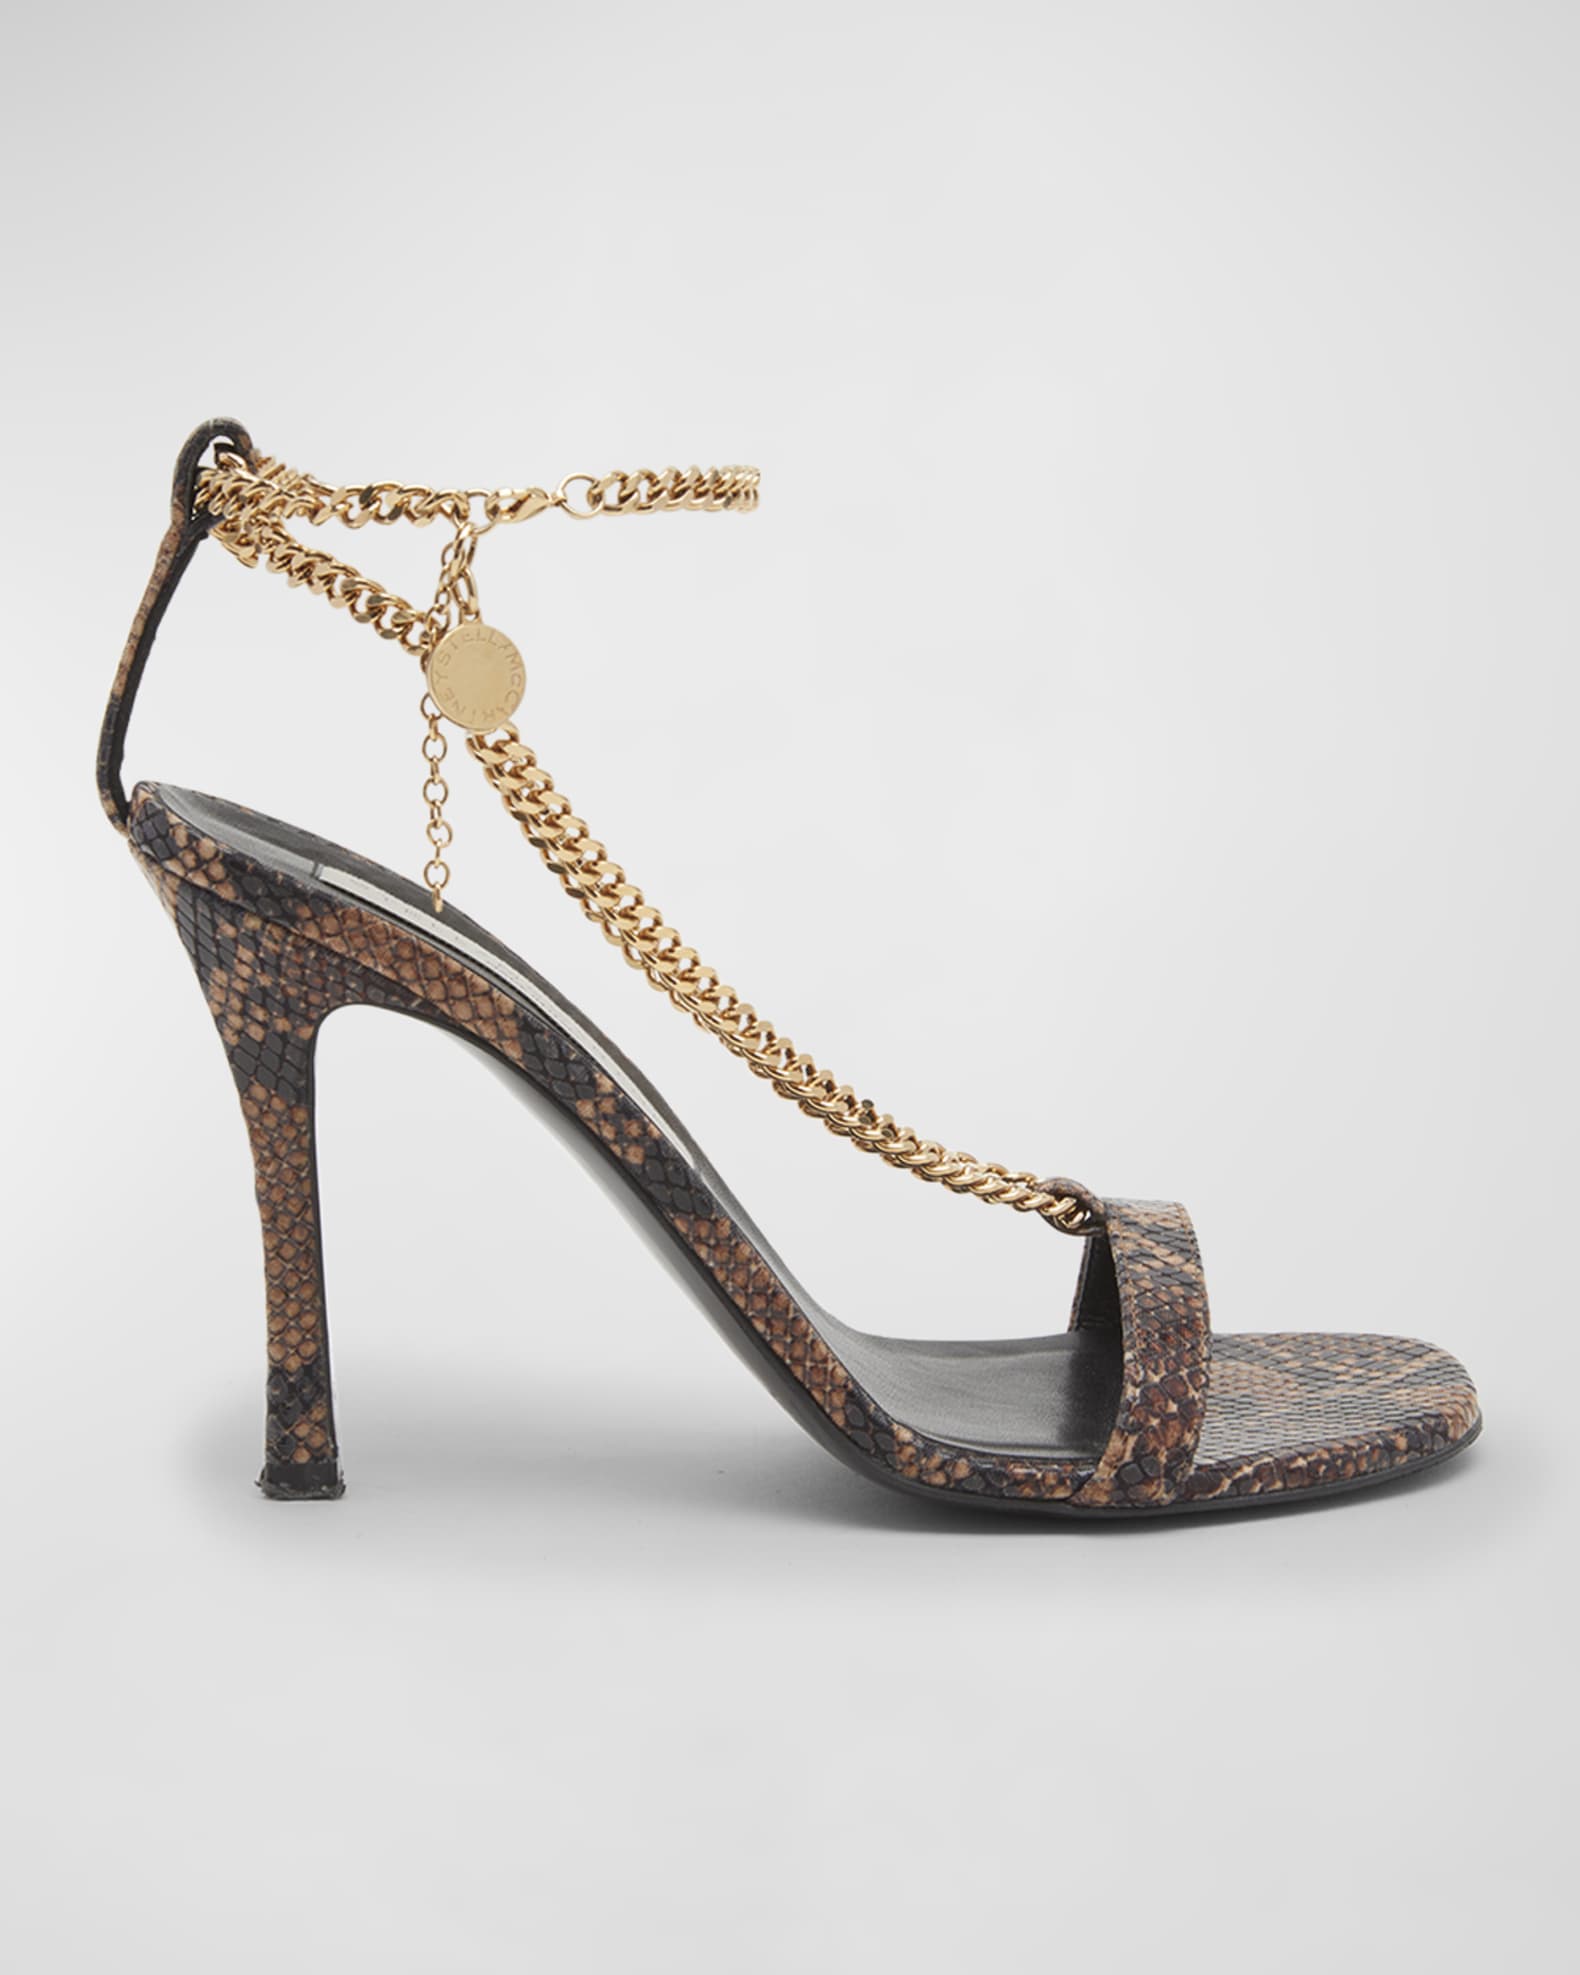 Snake print strappy heels with gold chain from Stella McCartney